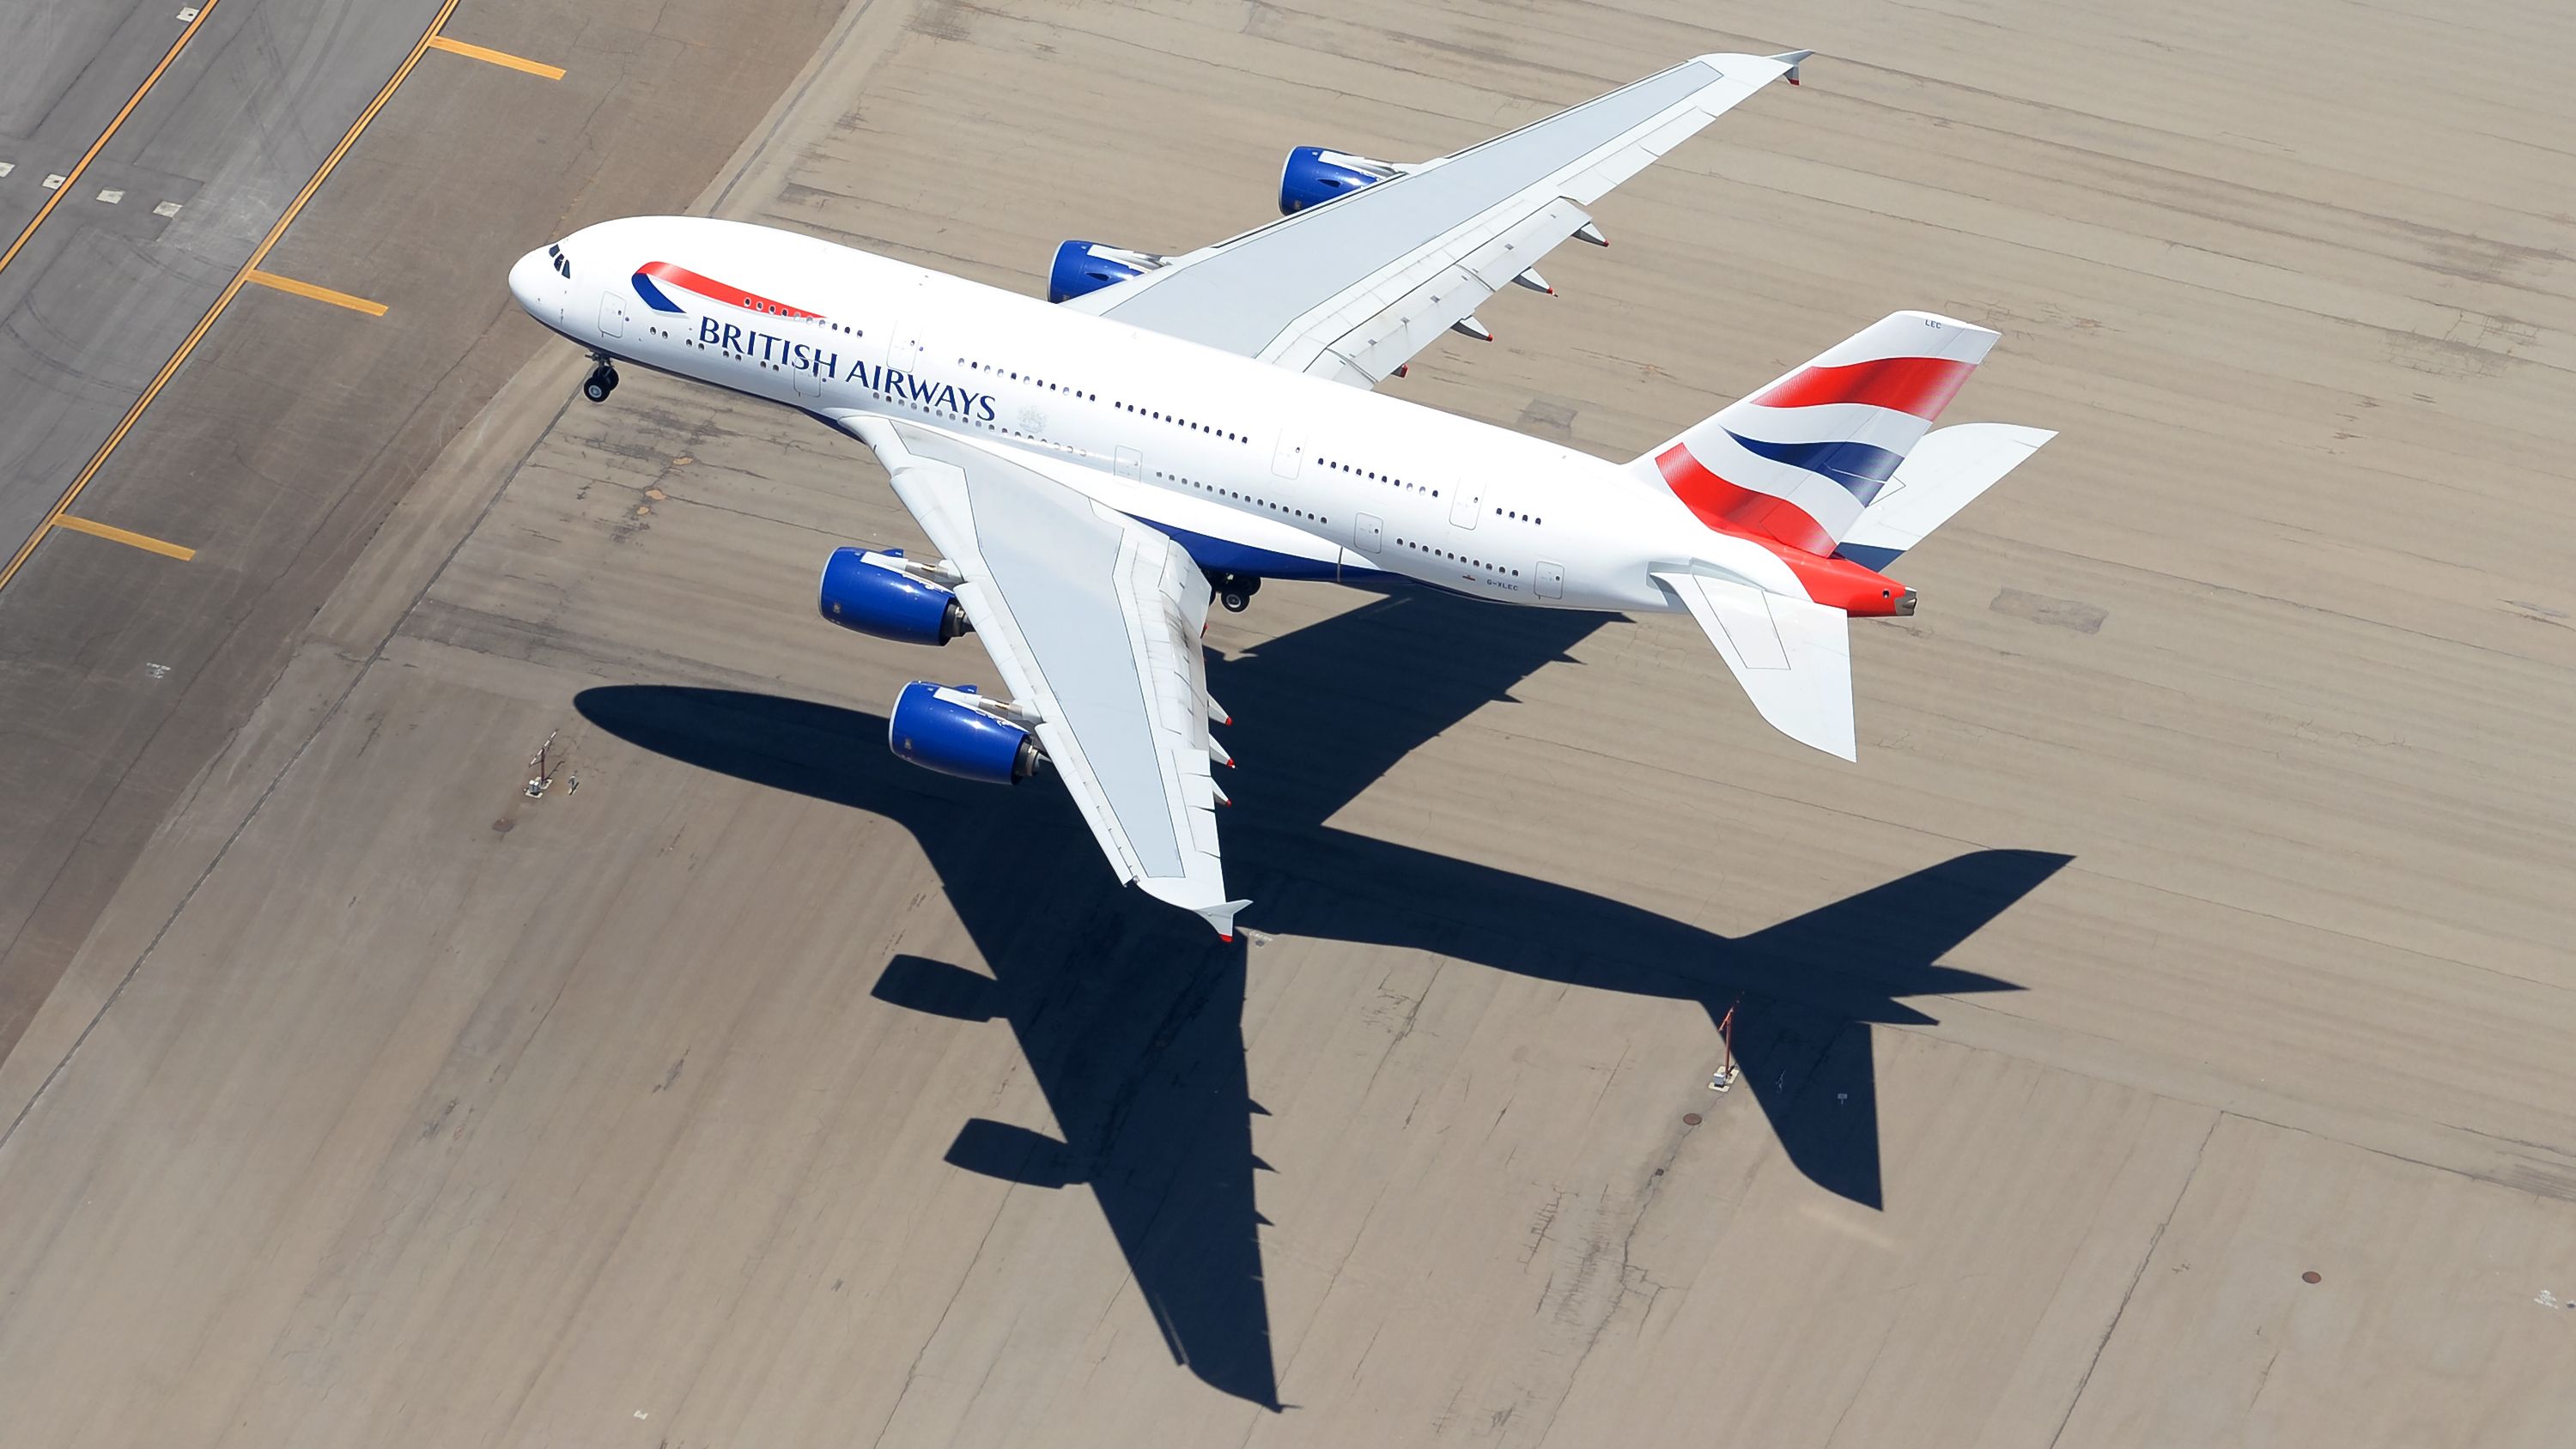 A British Airways Airbus A380 about to land.